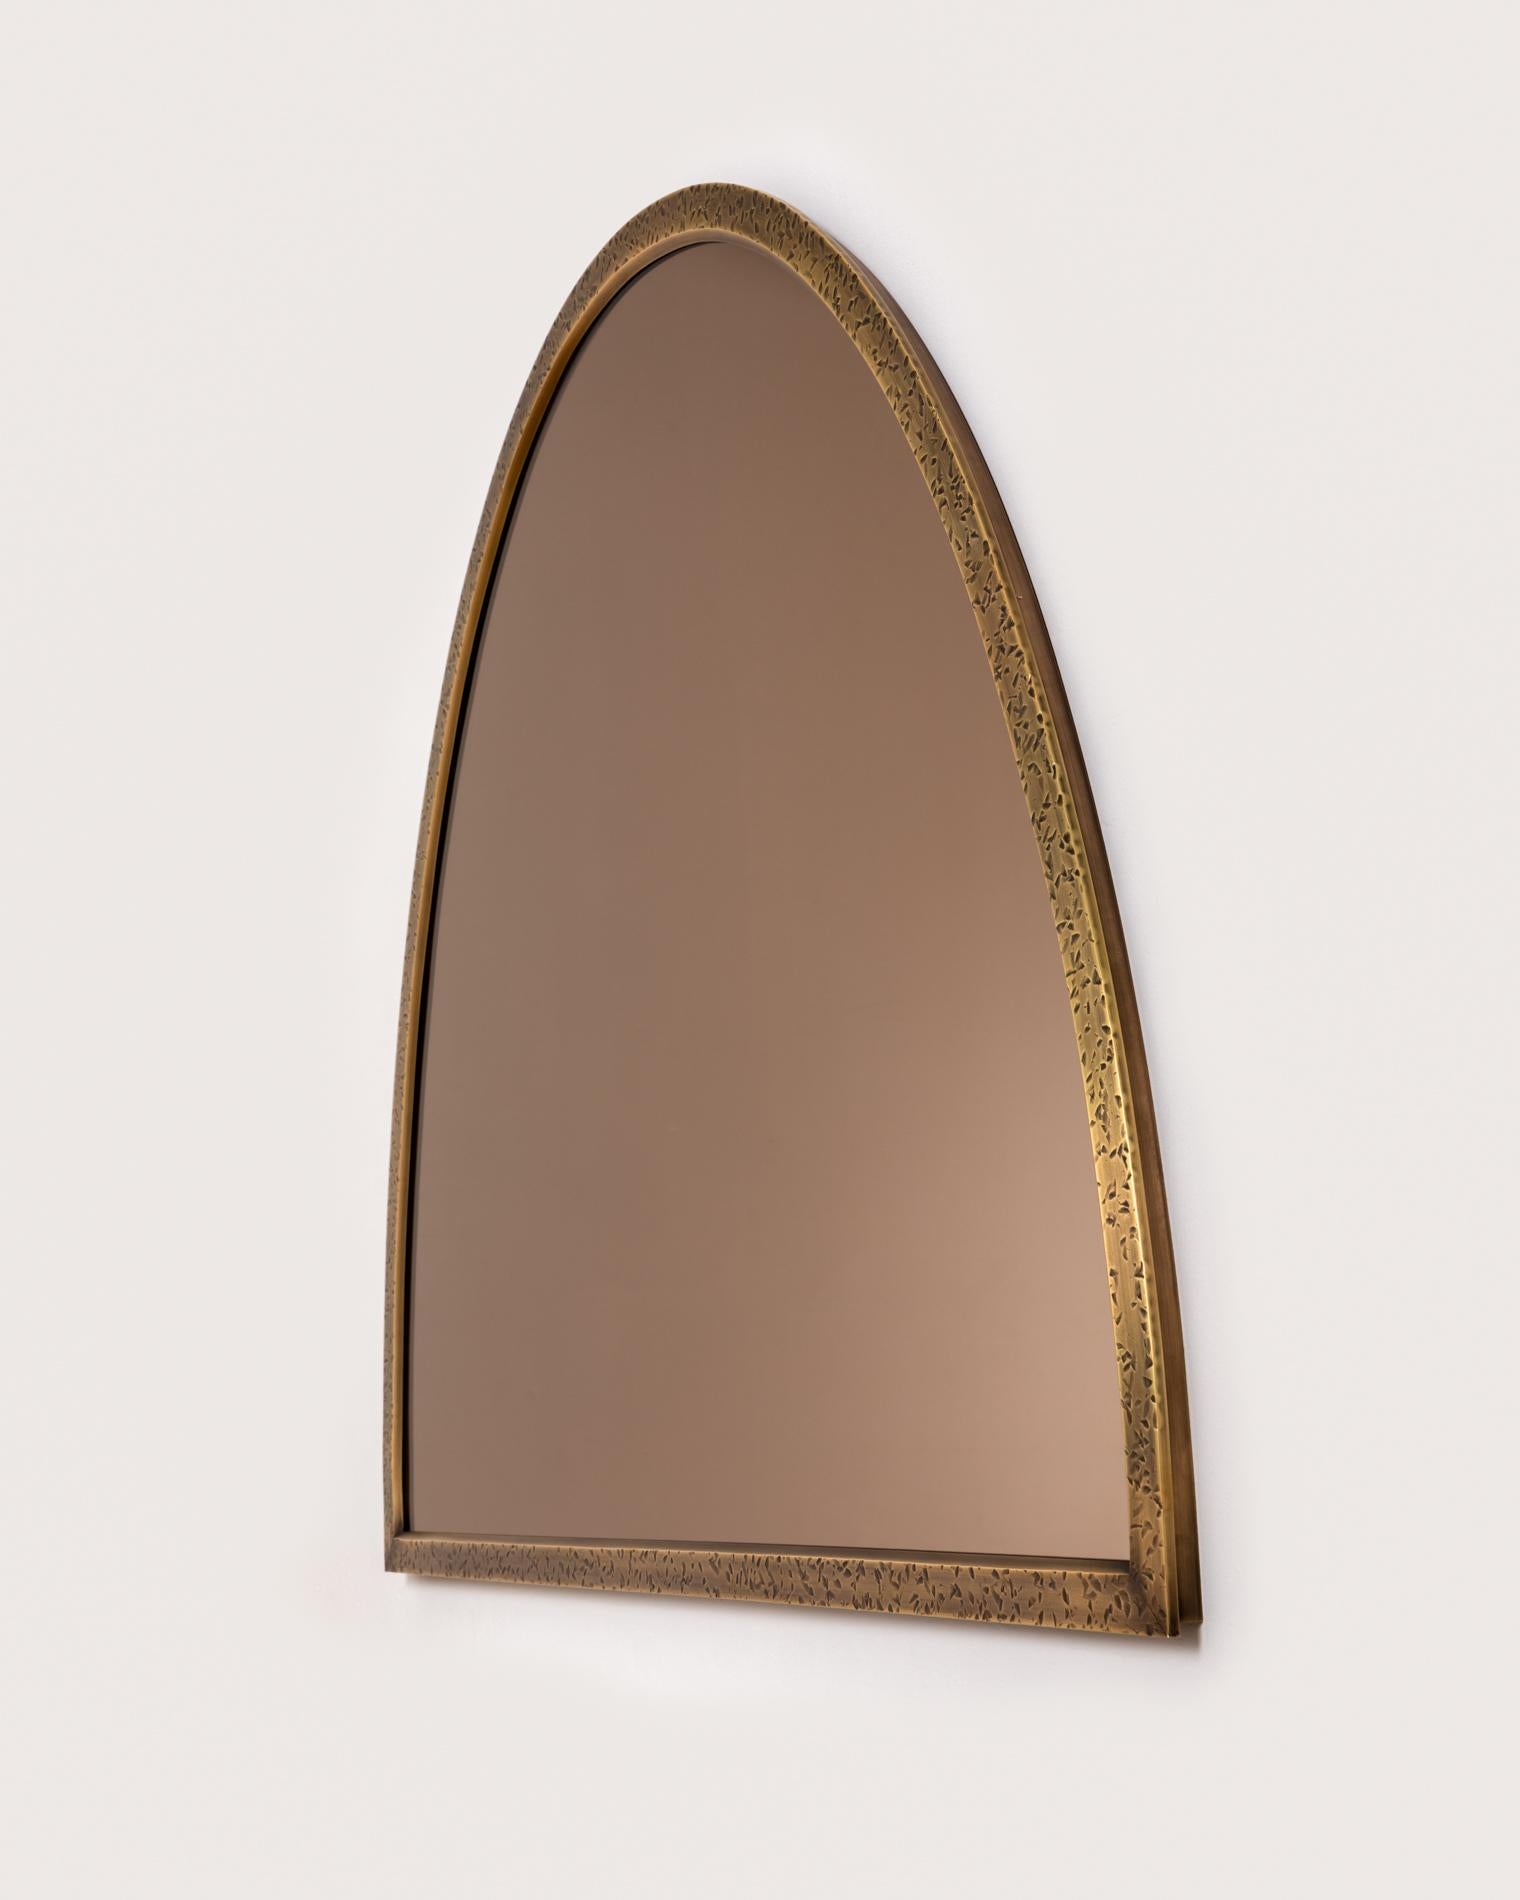 Post-Modern Mirooo Limited Edition Mirror by Moure Studio For Sale